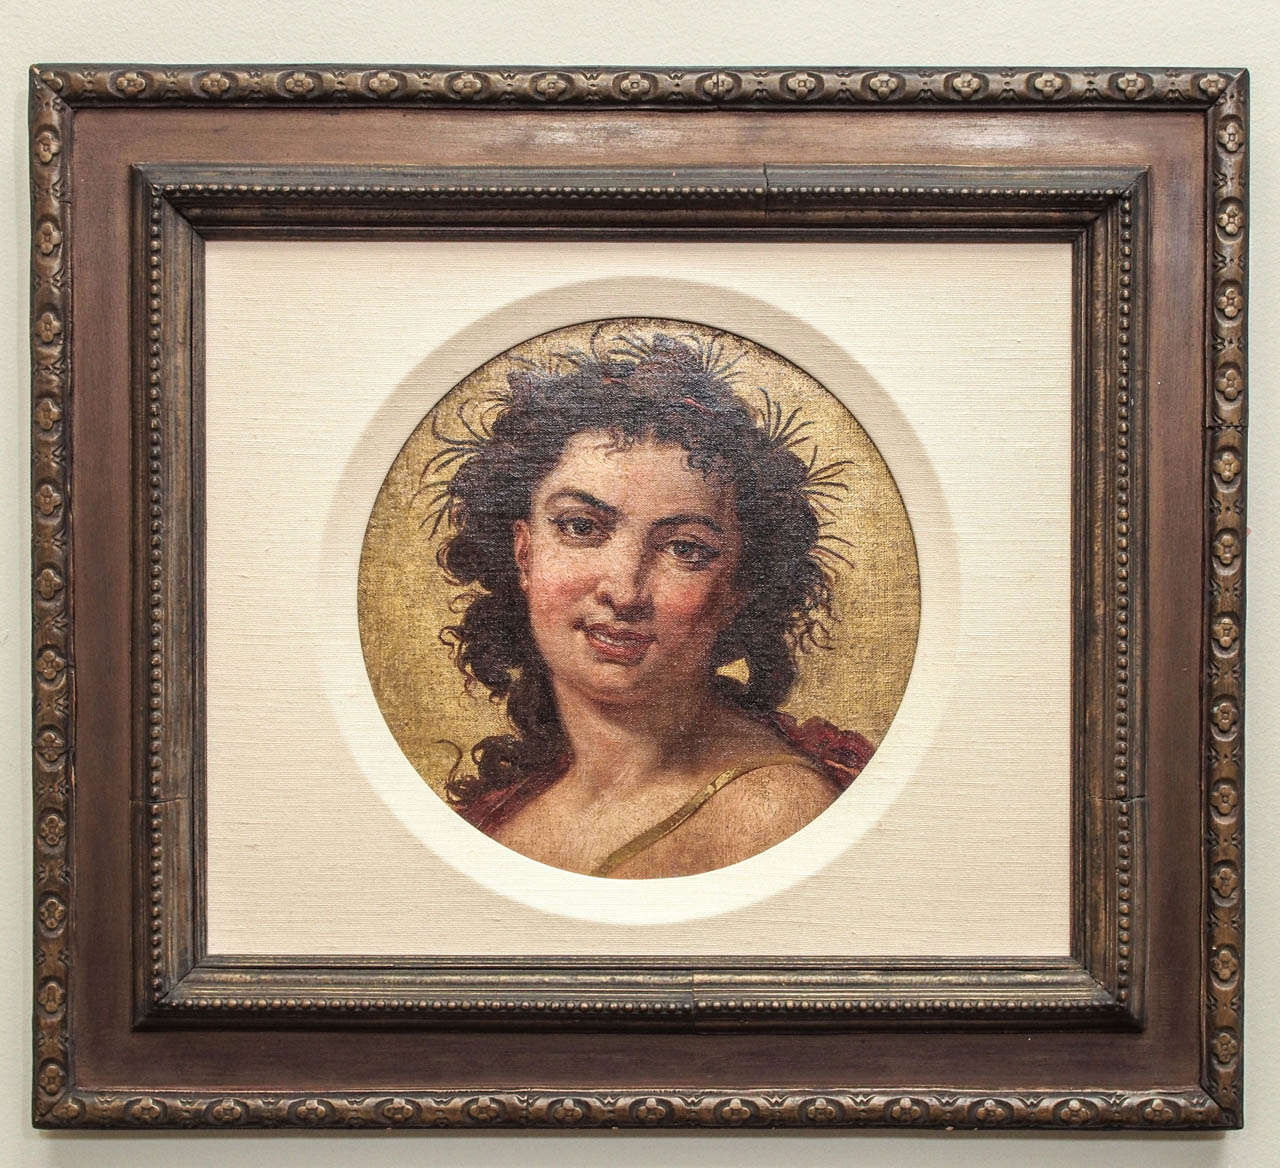 A late 18, early 19c. oil on canvas painting of a slightly gender ambiguous character, likely Diana, goddess of the hunt, with flora embellished hair and a leather strap for a quiver or box over her shoulder.  Finely woven canvas consistent with